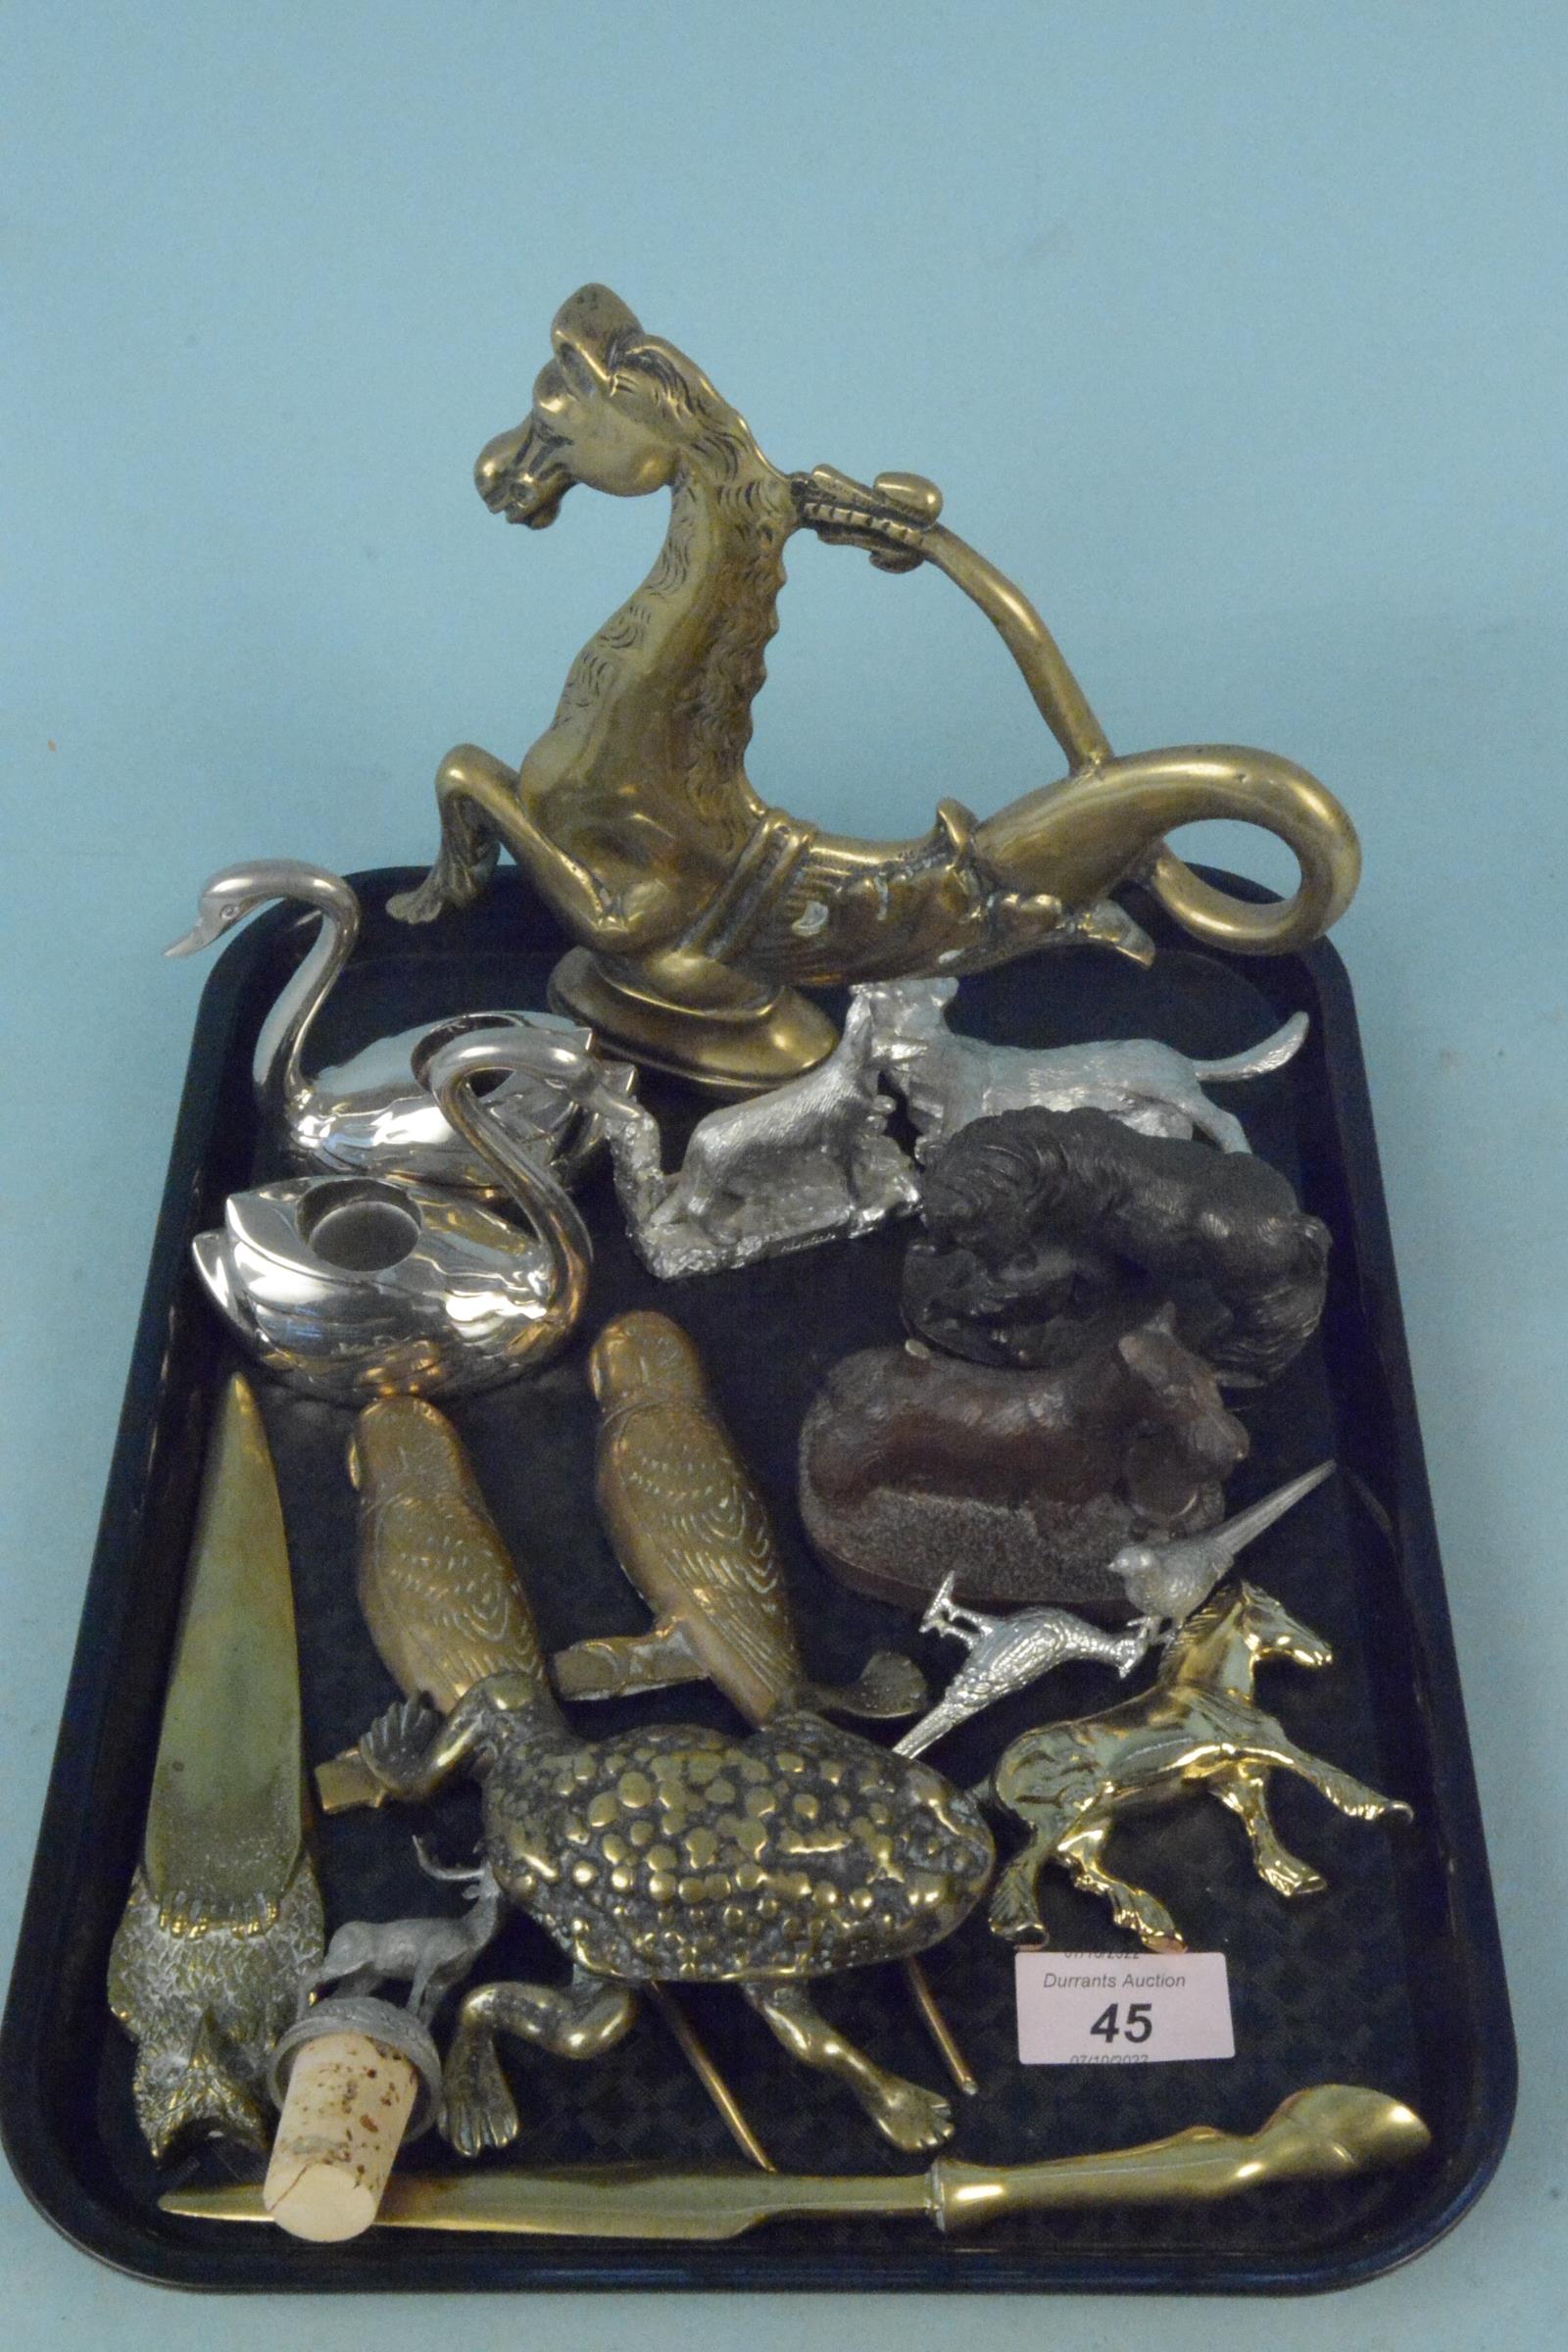 Mainly metalware with animal connections including a brass horse,